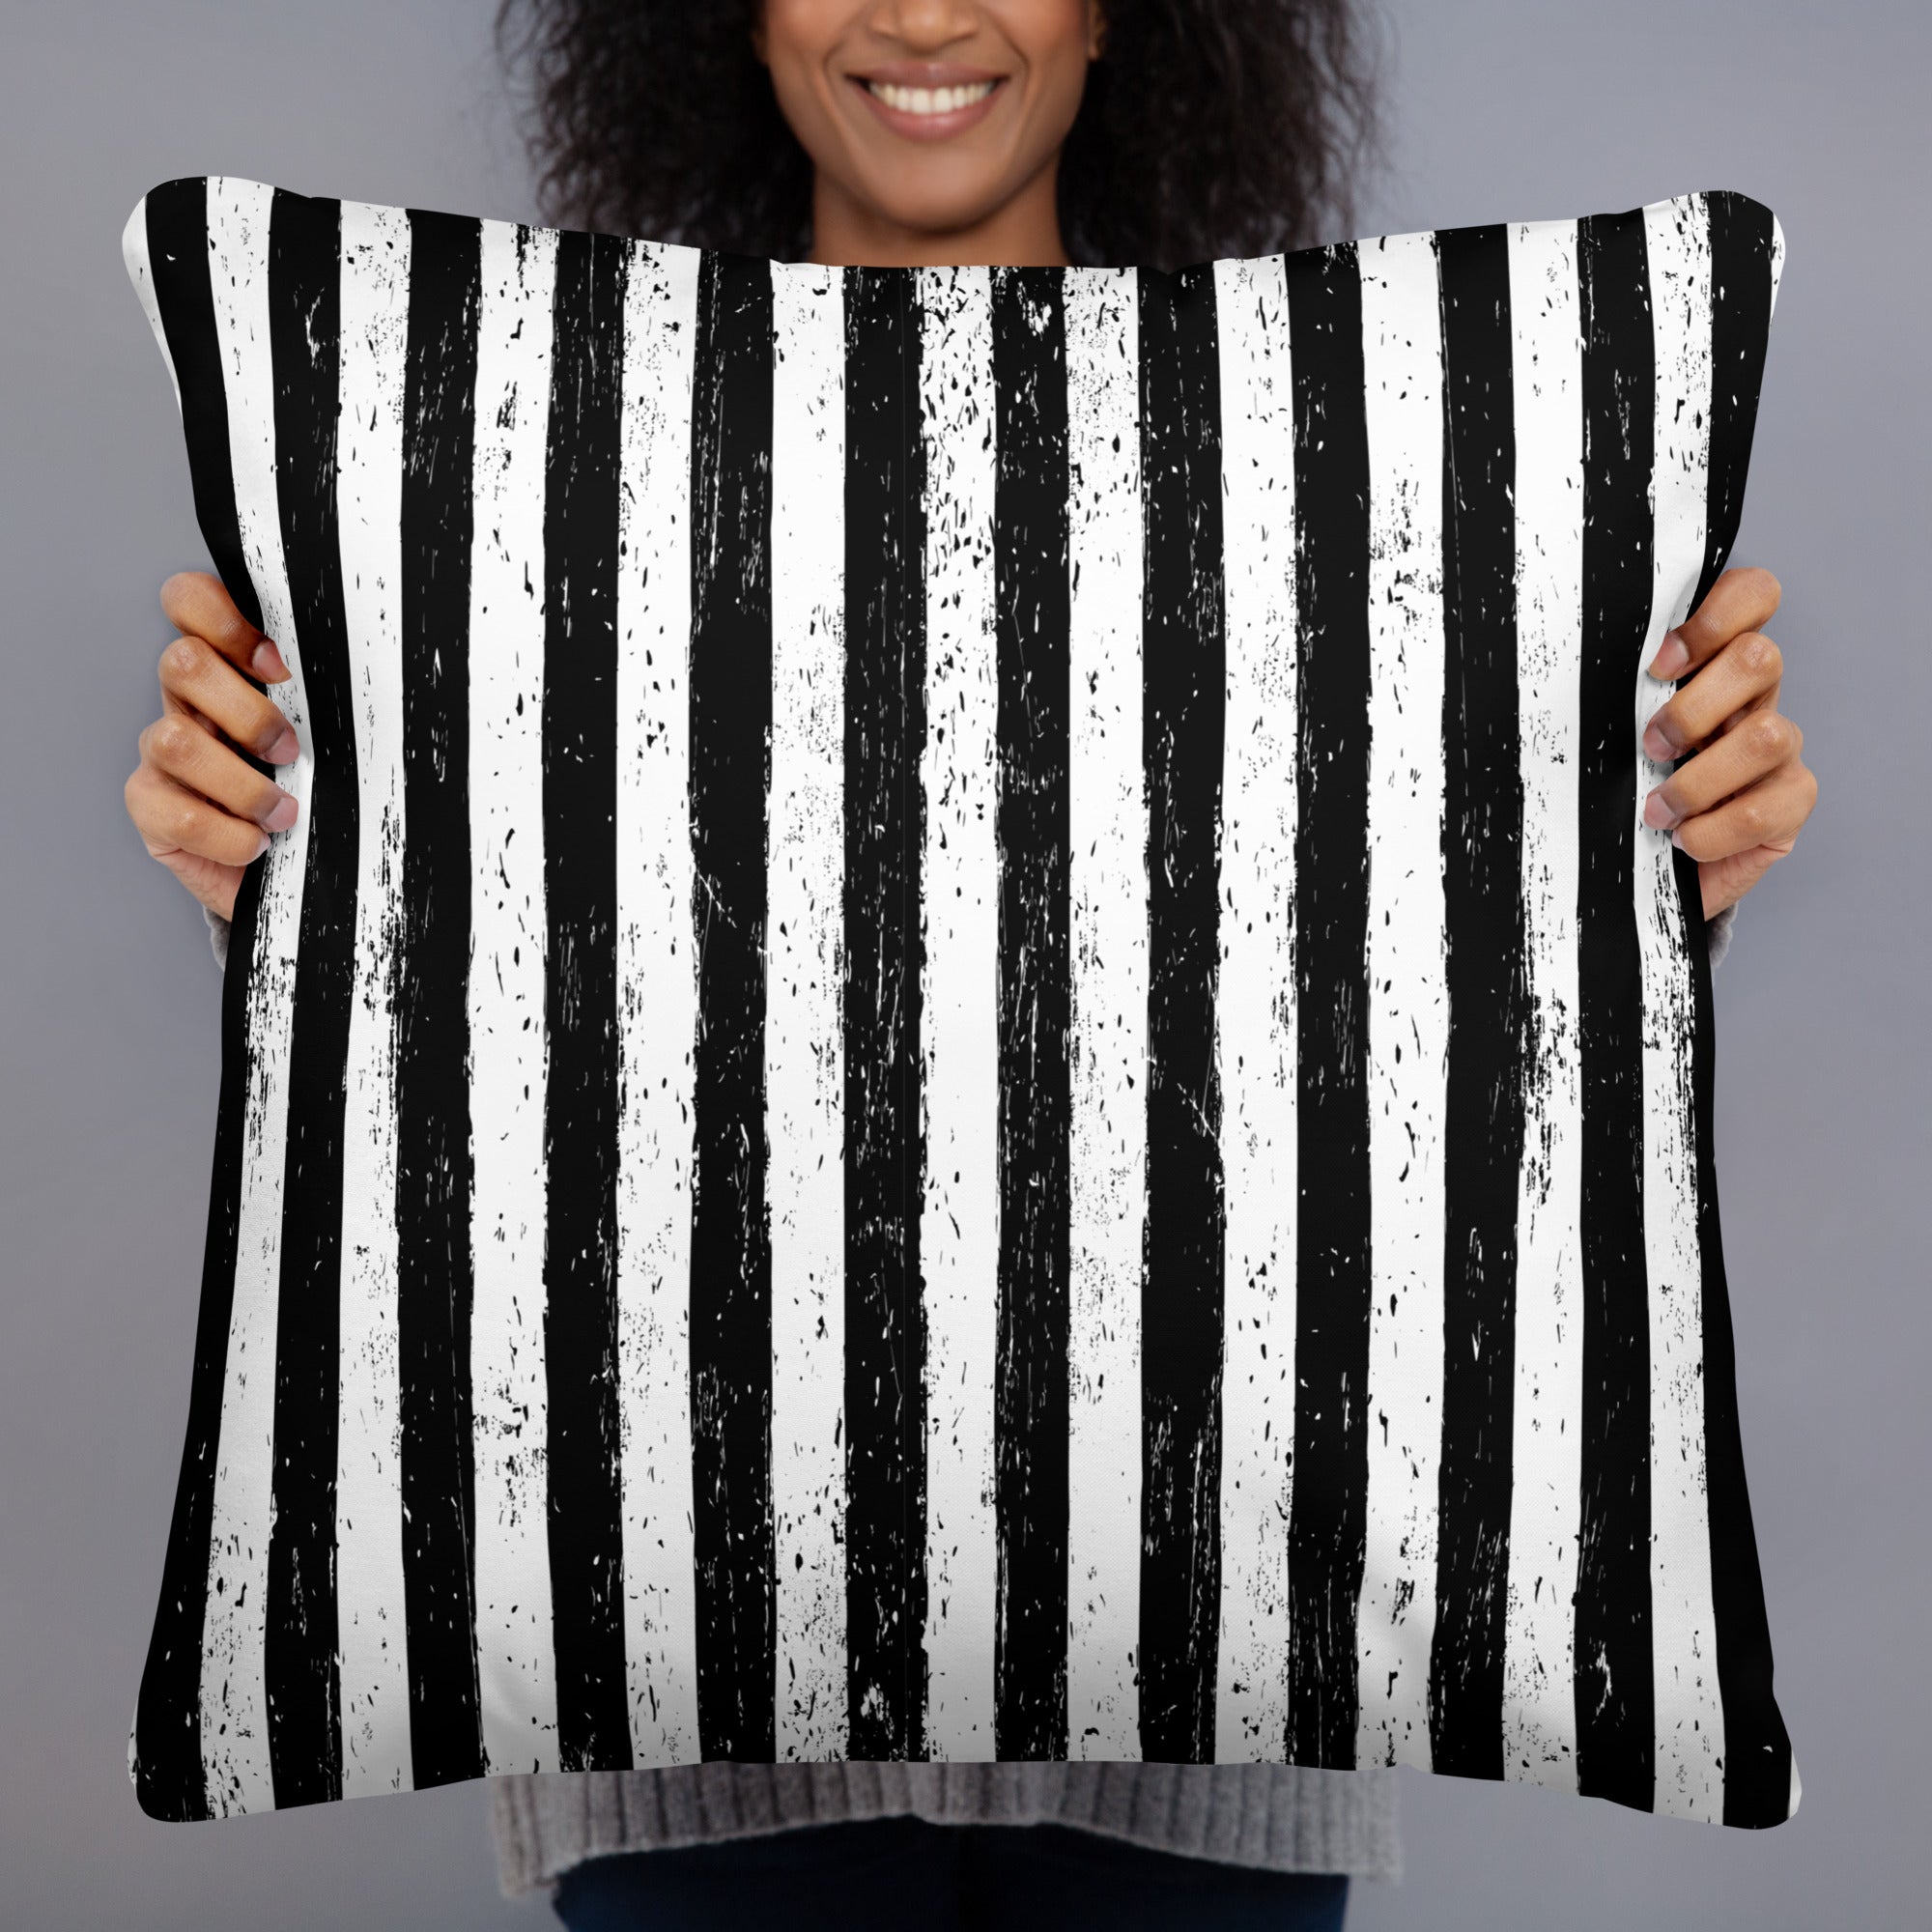 Black and White Distressed Vertical Stripe Basic Pillow - Edge of Life Designs